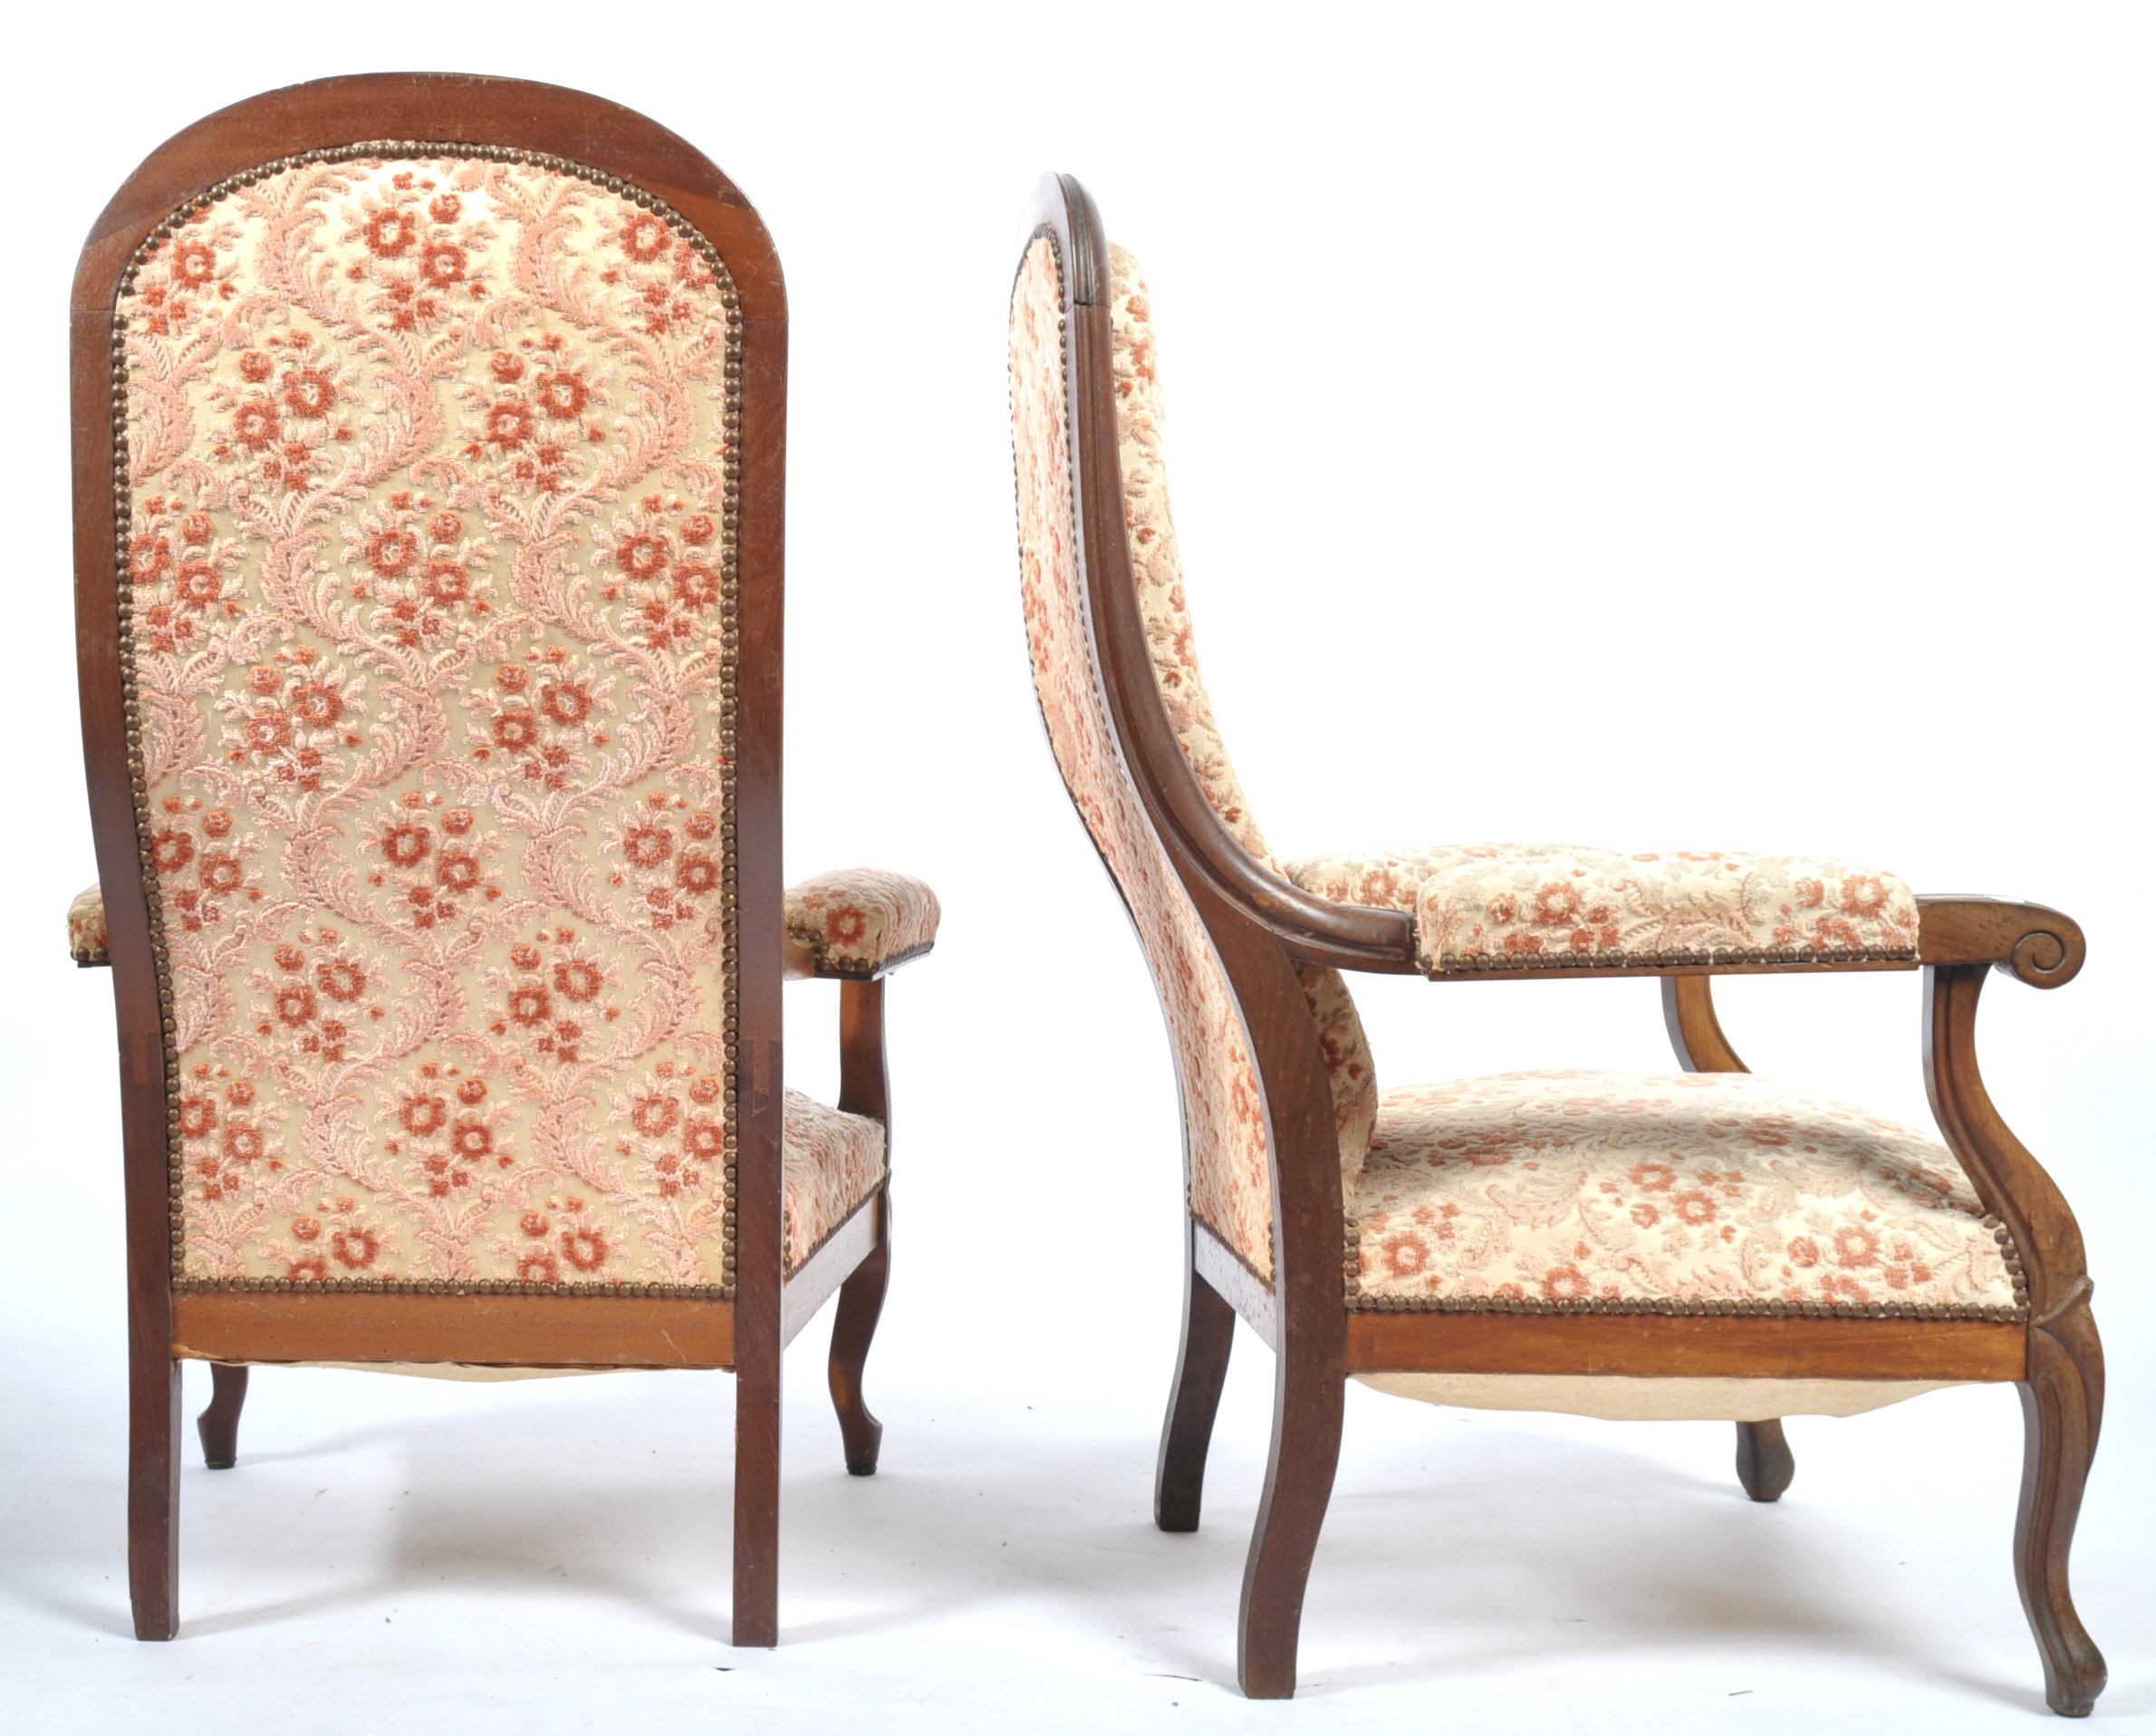 PAIR OF 19TH CENTURY FRENCH HIS AND HERS ARMCHAIRS - Image 5 of 6